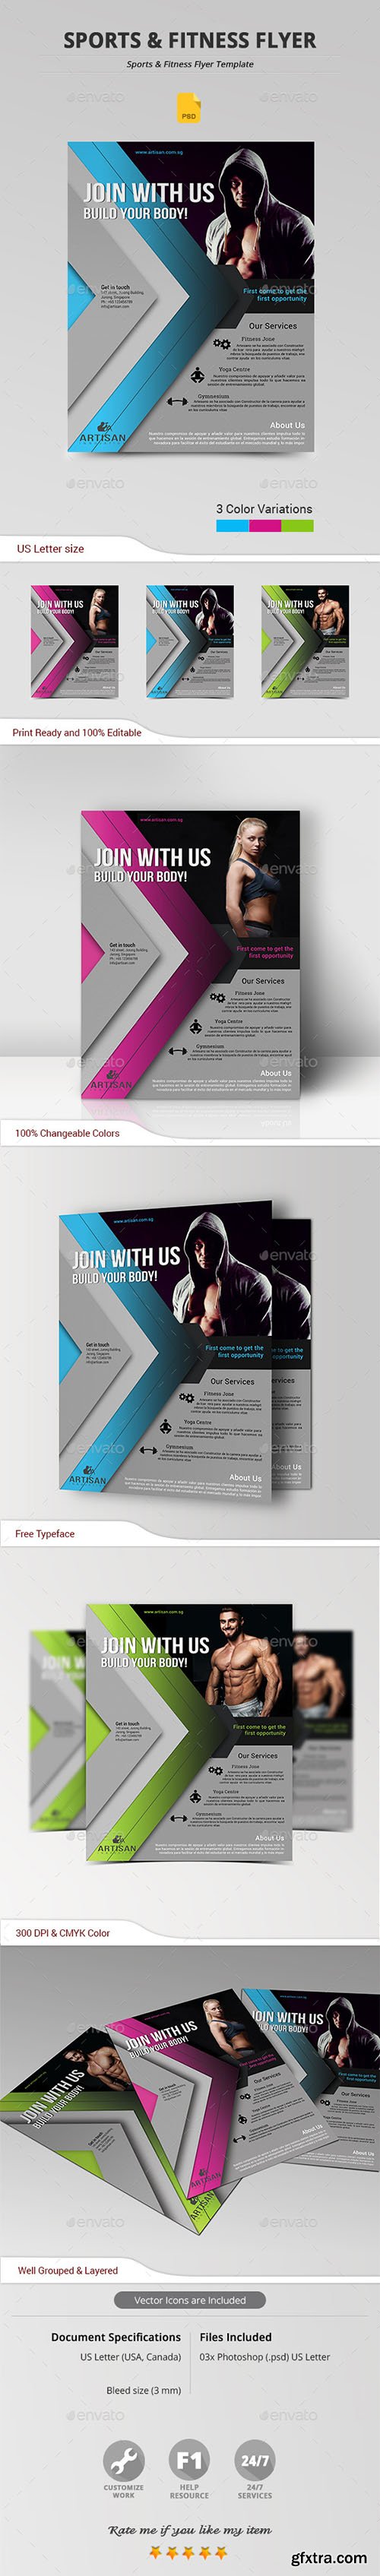 Graphicriver Sports & Fitness Flyer 13986643